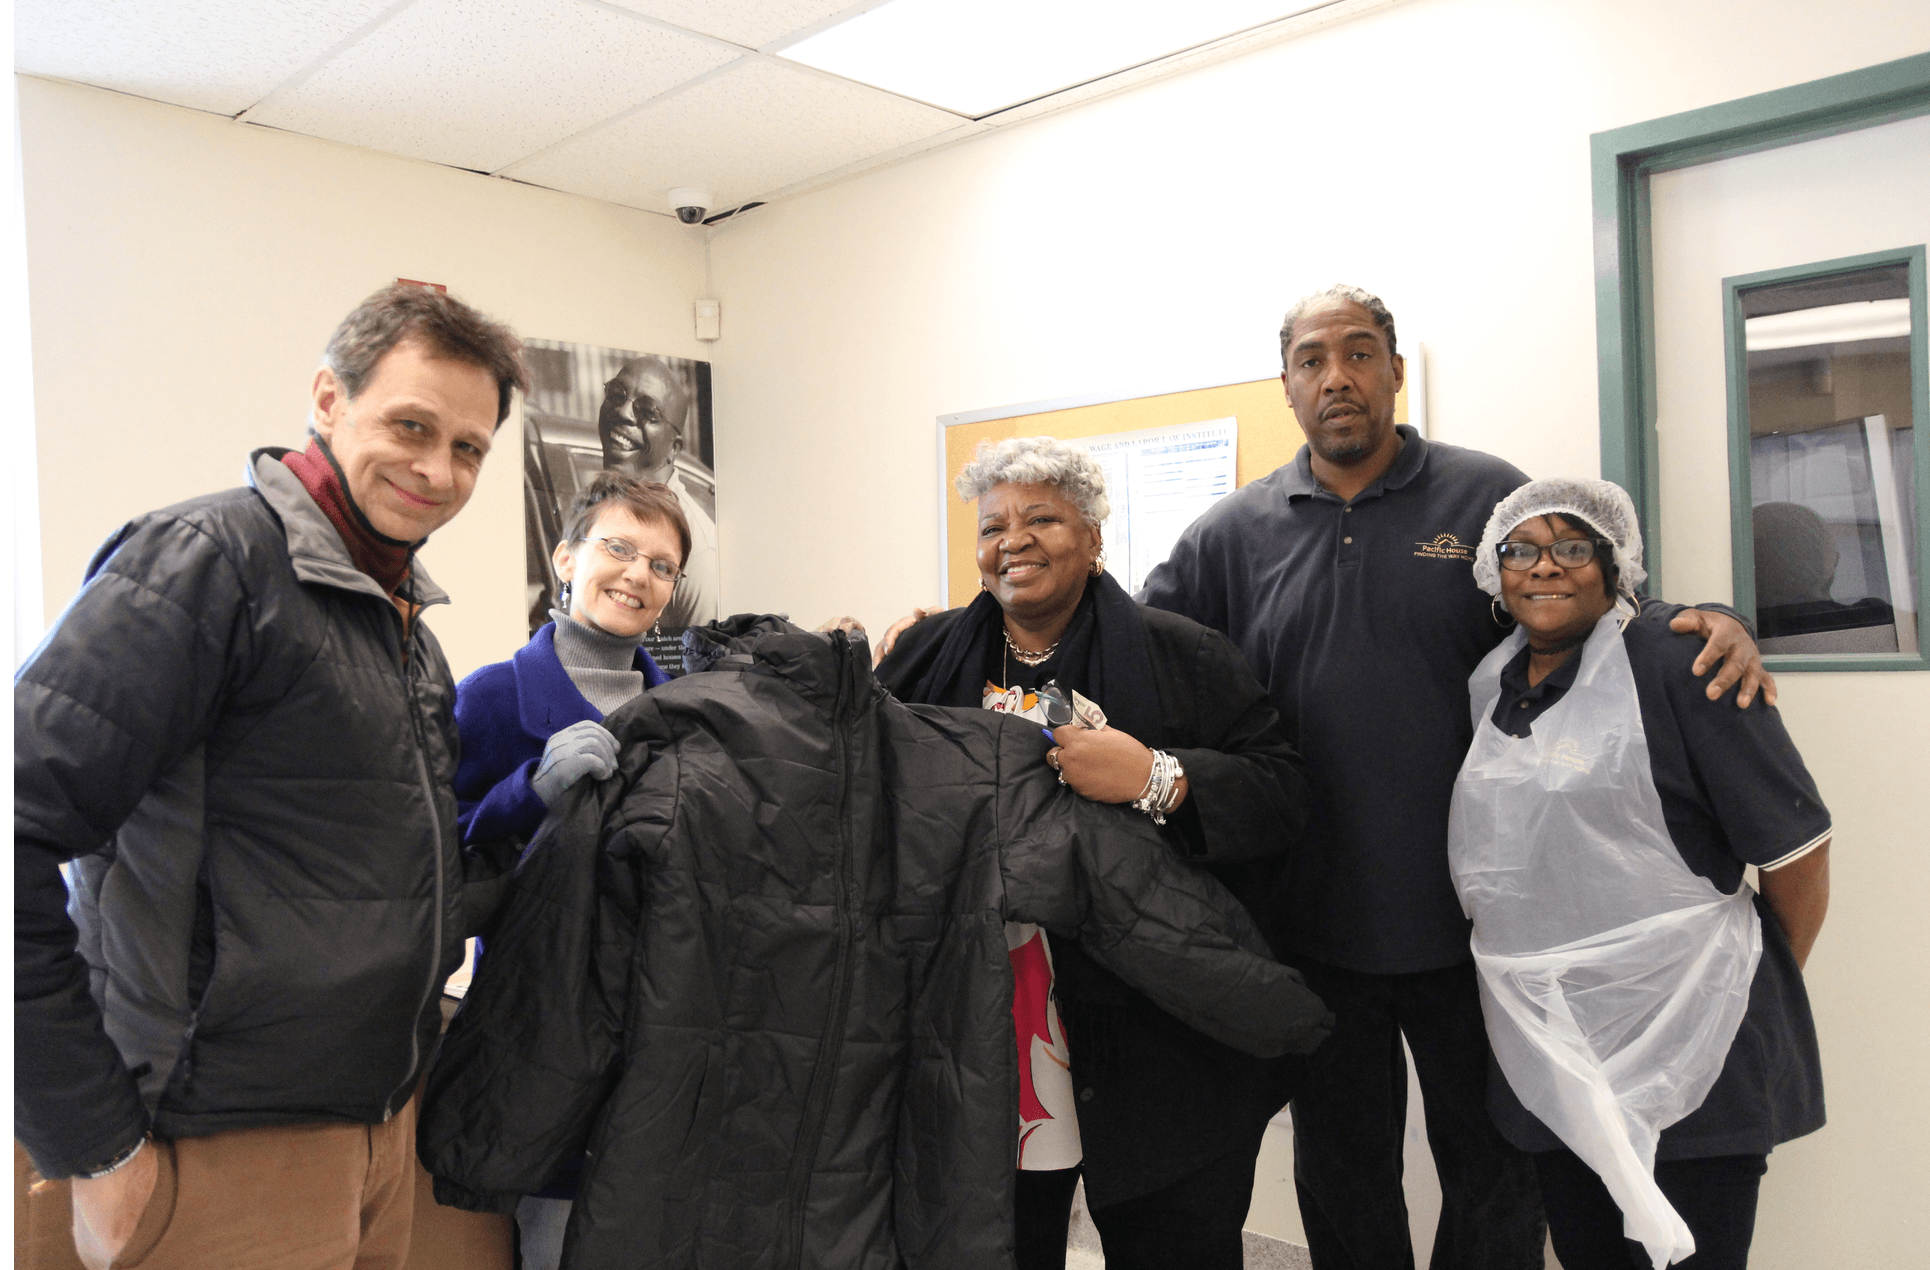 Left to right: Don Adams and Mitzi Adams of Peace Community Chapel, with Pacific House residential services manager Velma Clark, and client service advocates. Frank Knight and Theresa Gainer. Dec 20, 2017 Photo: Leslie Yager